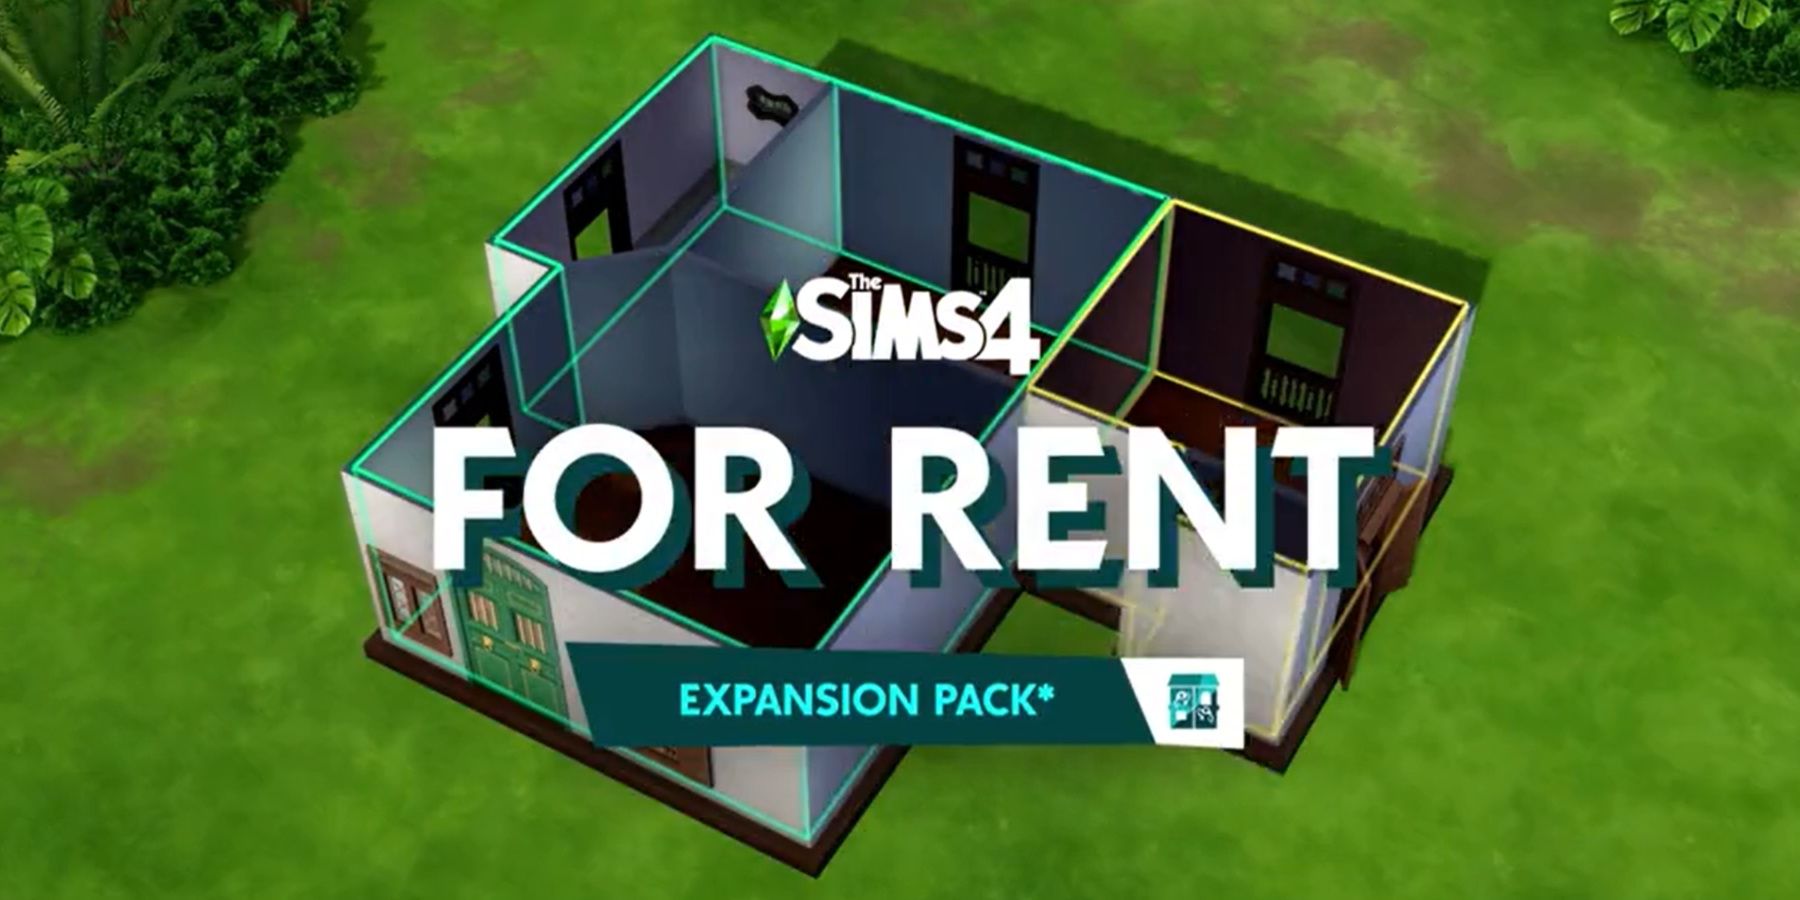 for rent expansion pack promo image